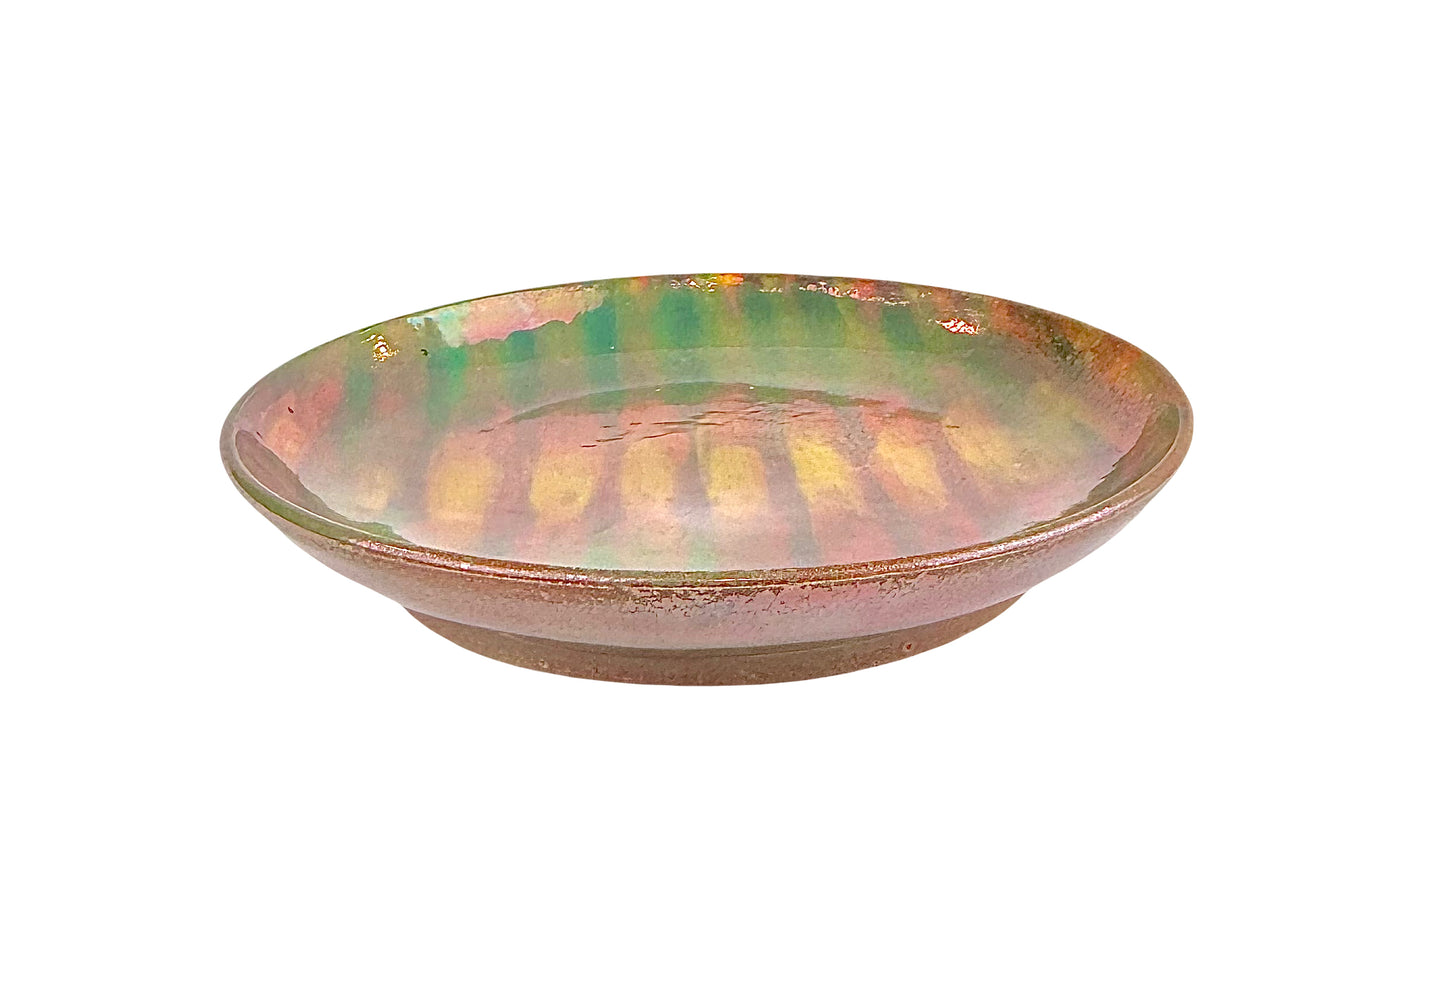 Gold Luster Glaze Shallow Bowl with Striped Colored Engobe Design